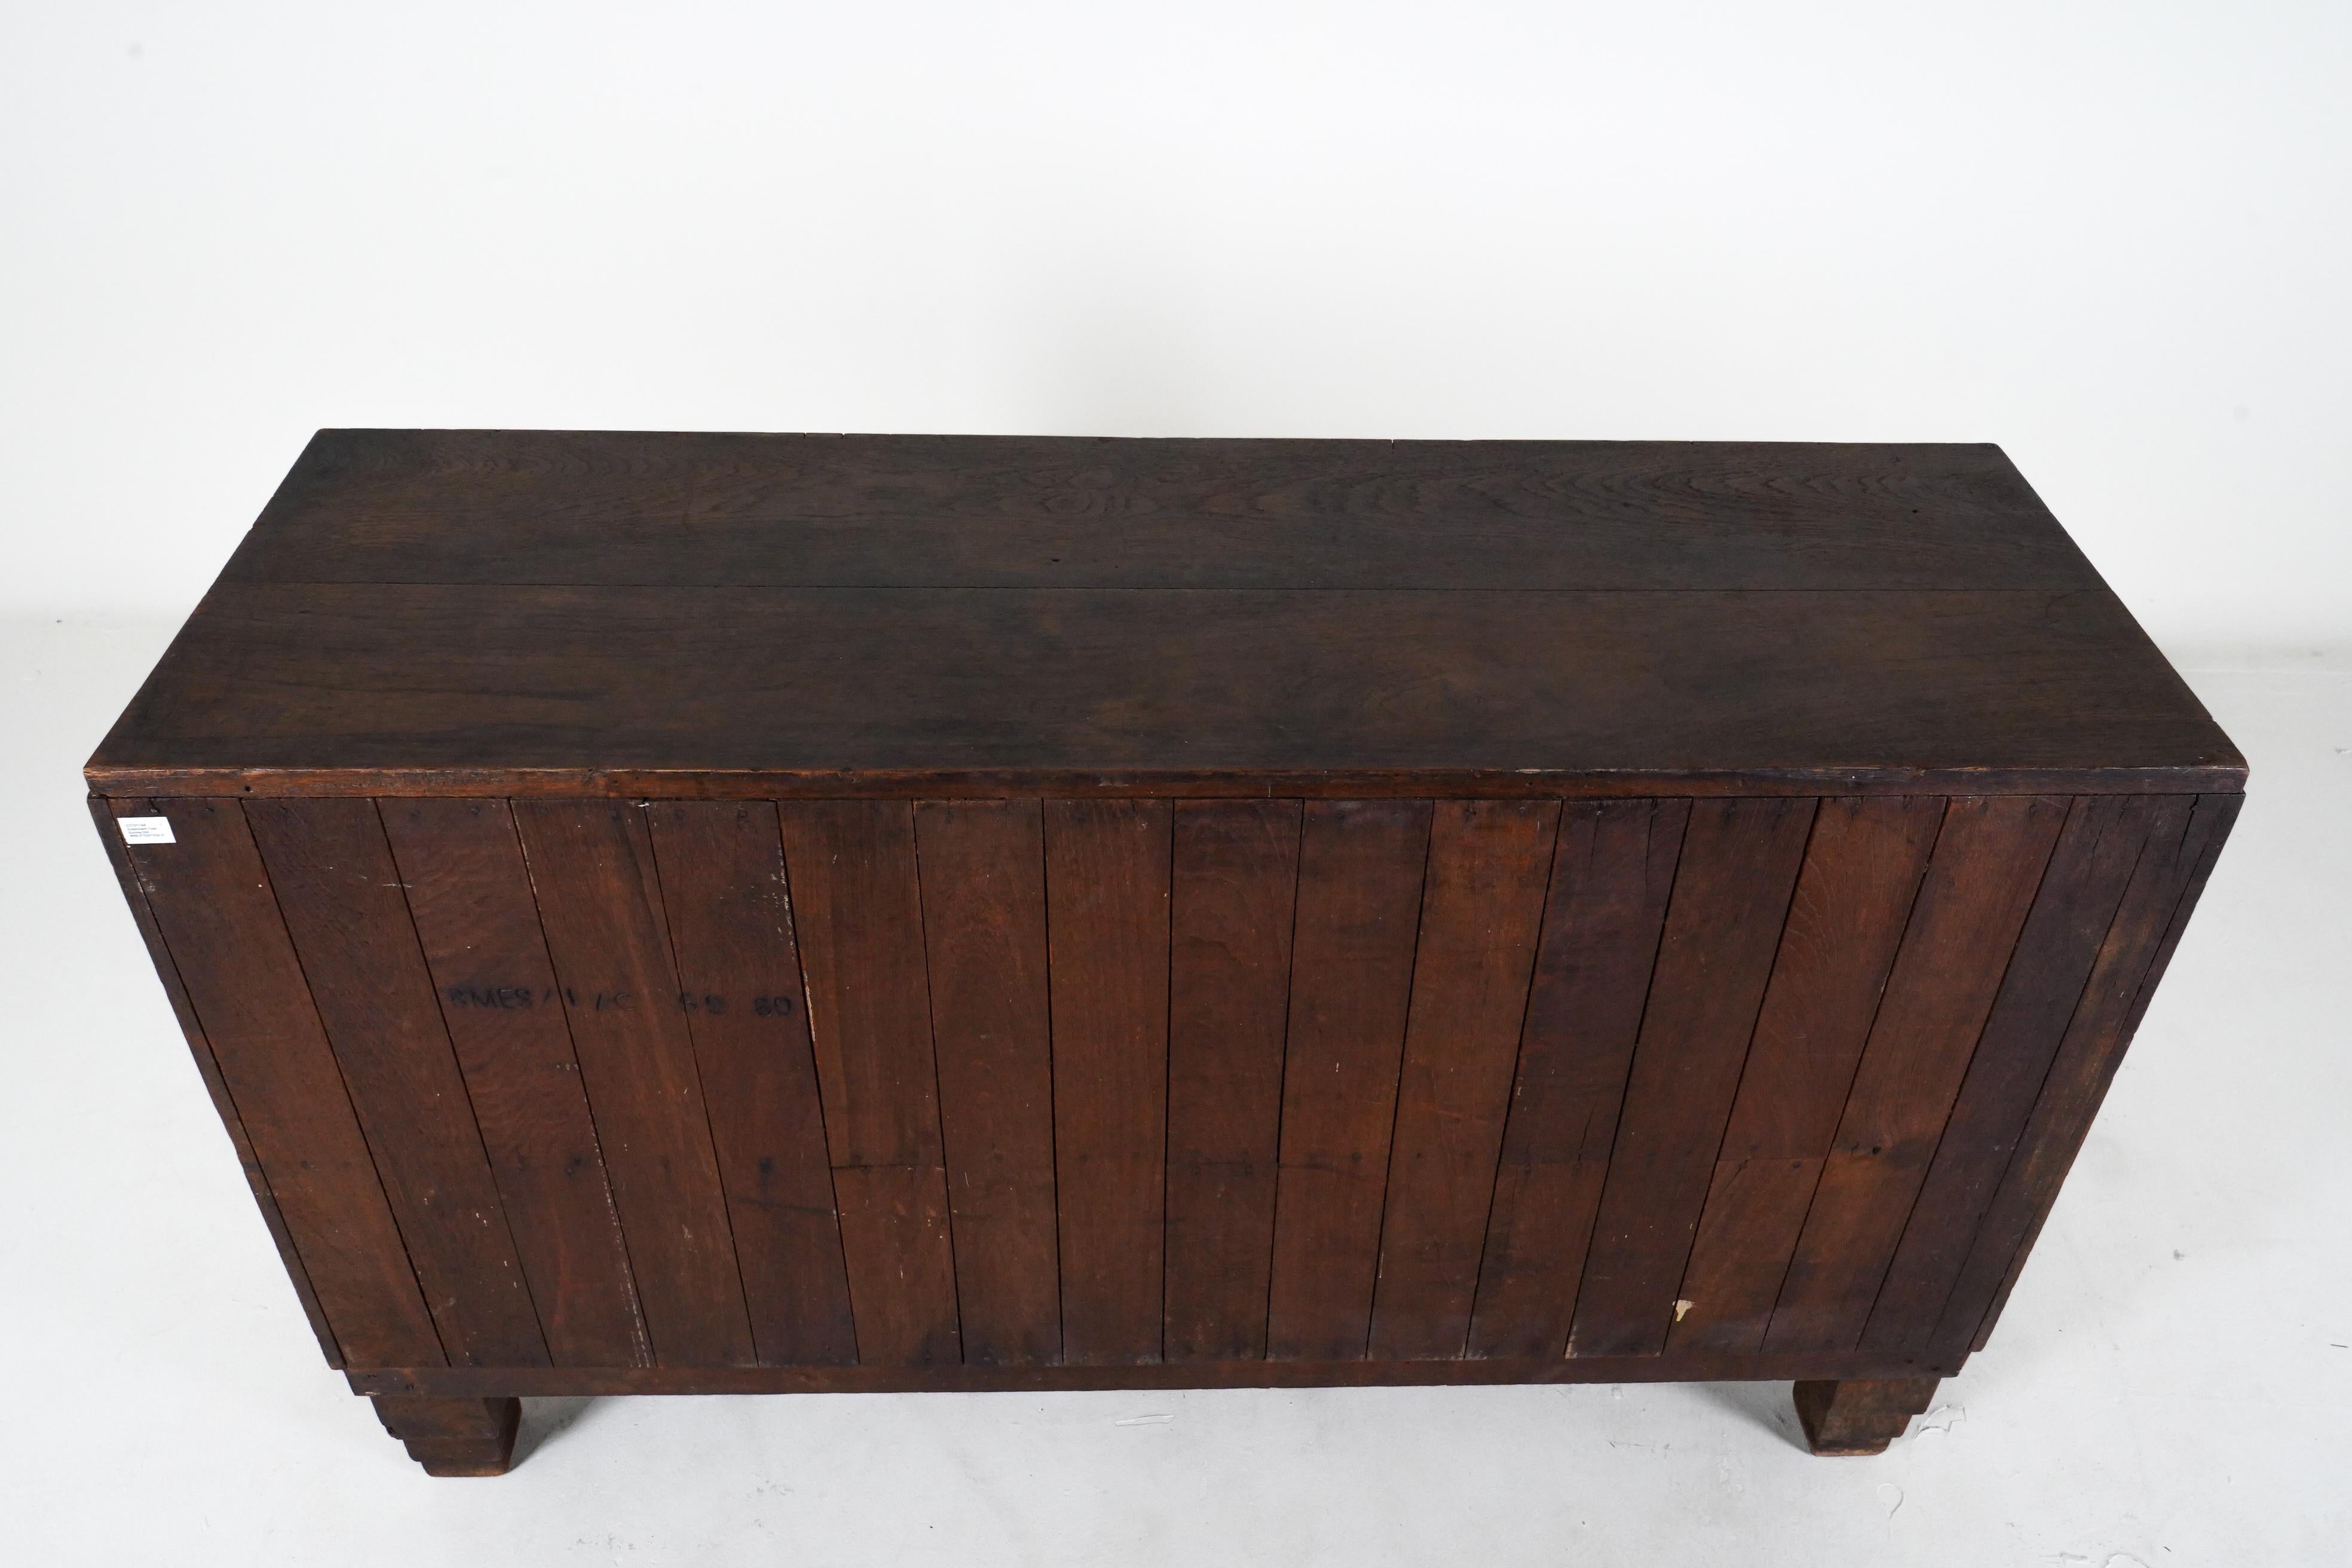 A British Colonial Teak Wood Shop Counter For Sale 6